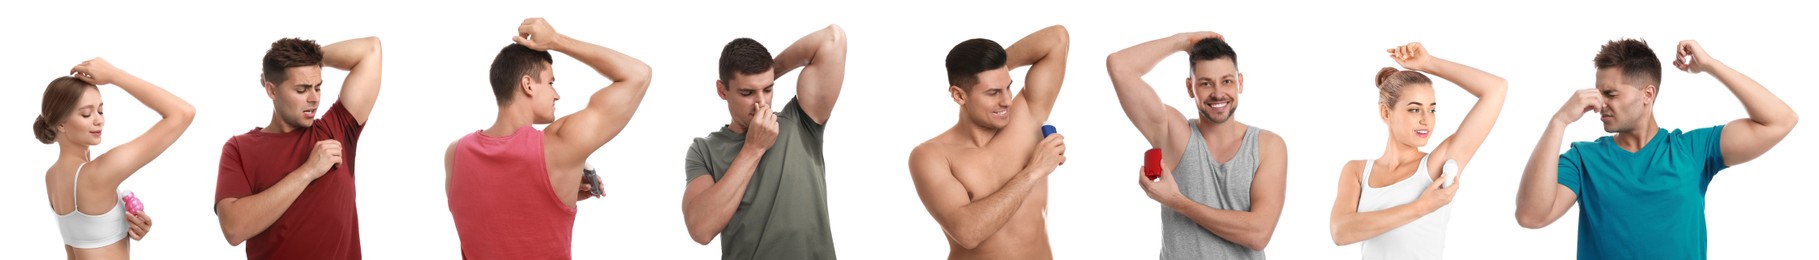 Collage with photos of people applying deodorants to armpits and with sweat stains on clothes against white background. Banner design